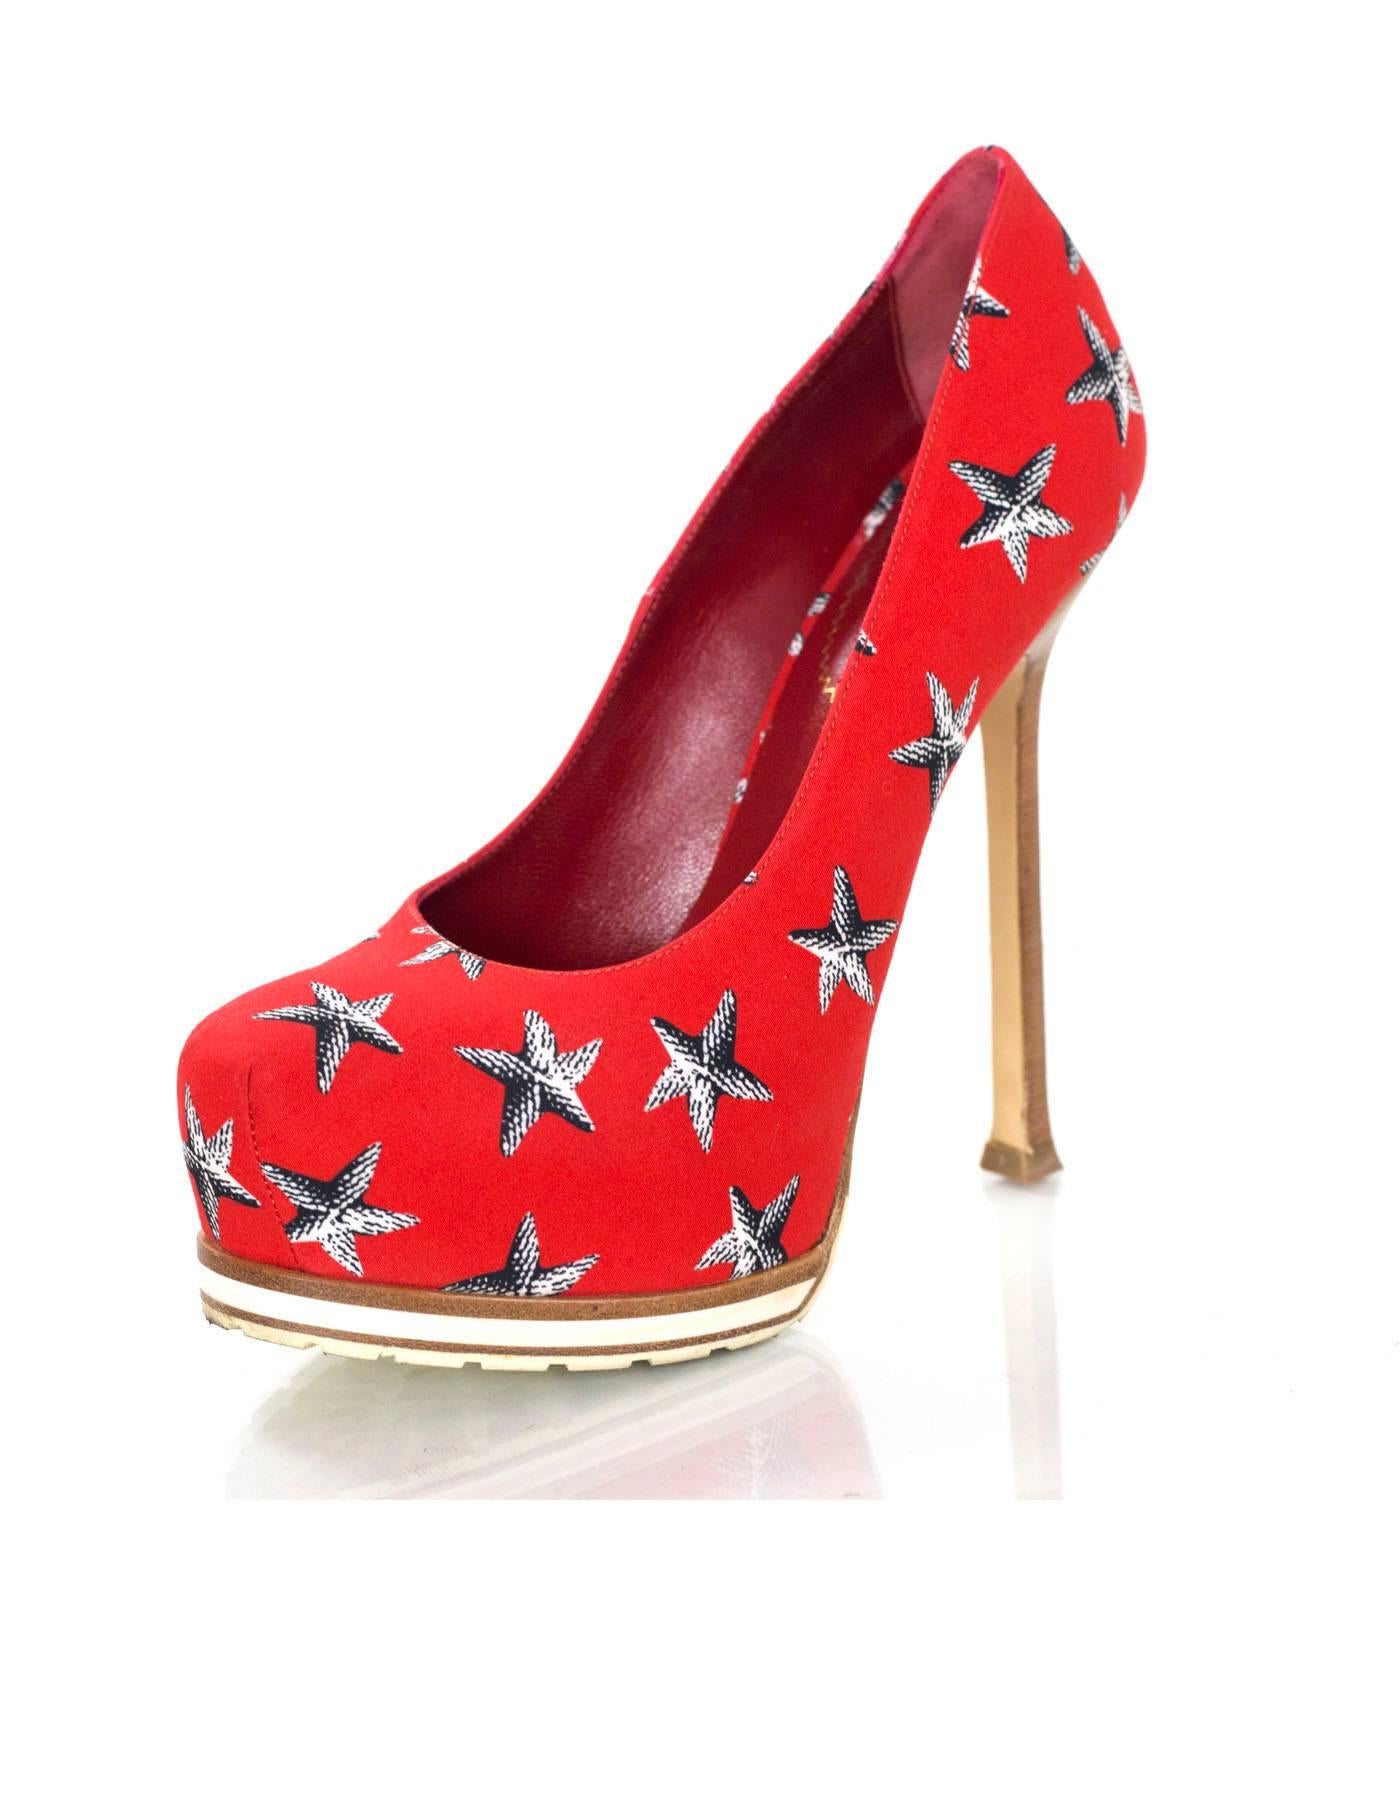 YSL Red Medium Starfish Tribtoo 105 Pumps Sz 36.5

Made In: Italy
Color: Red, white, blue
Materials: Canvas
Closure/Opening: Slip on
Sole Stamp: Yves Saint Laurent Made in Italy 36.5
Retail Price: $895 + tax
Overall Condition: Excellent pre-owned